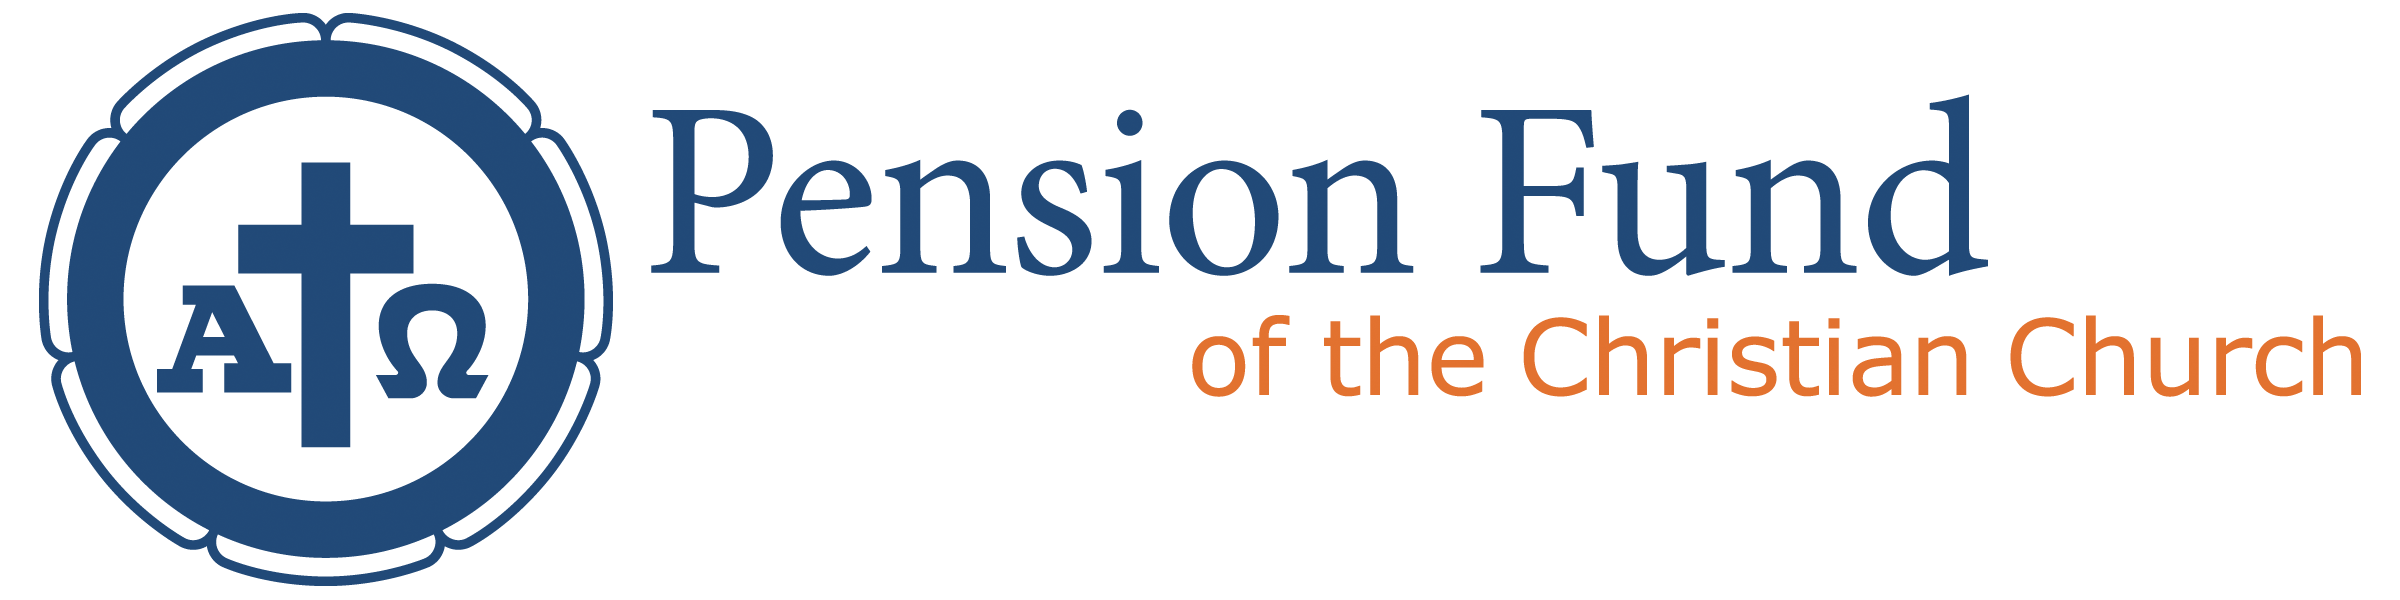 Pension Fund of the Christian Church Company Logo